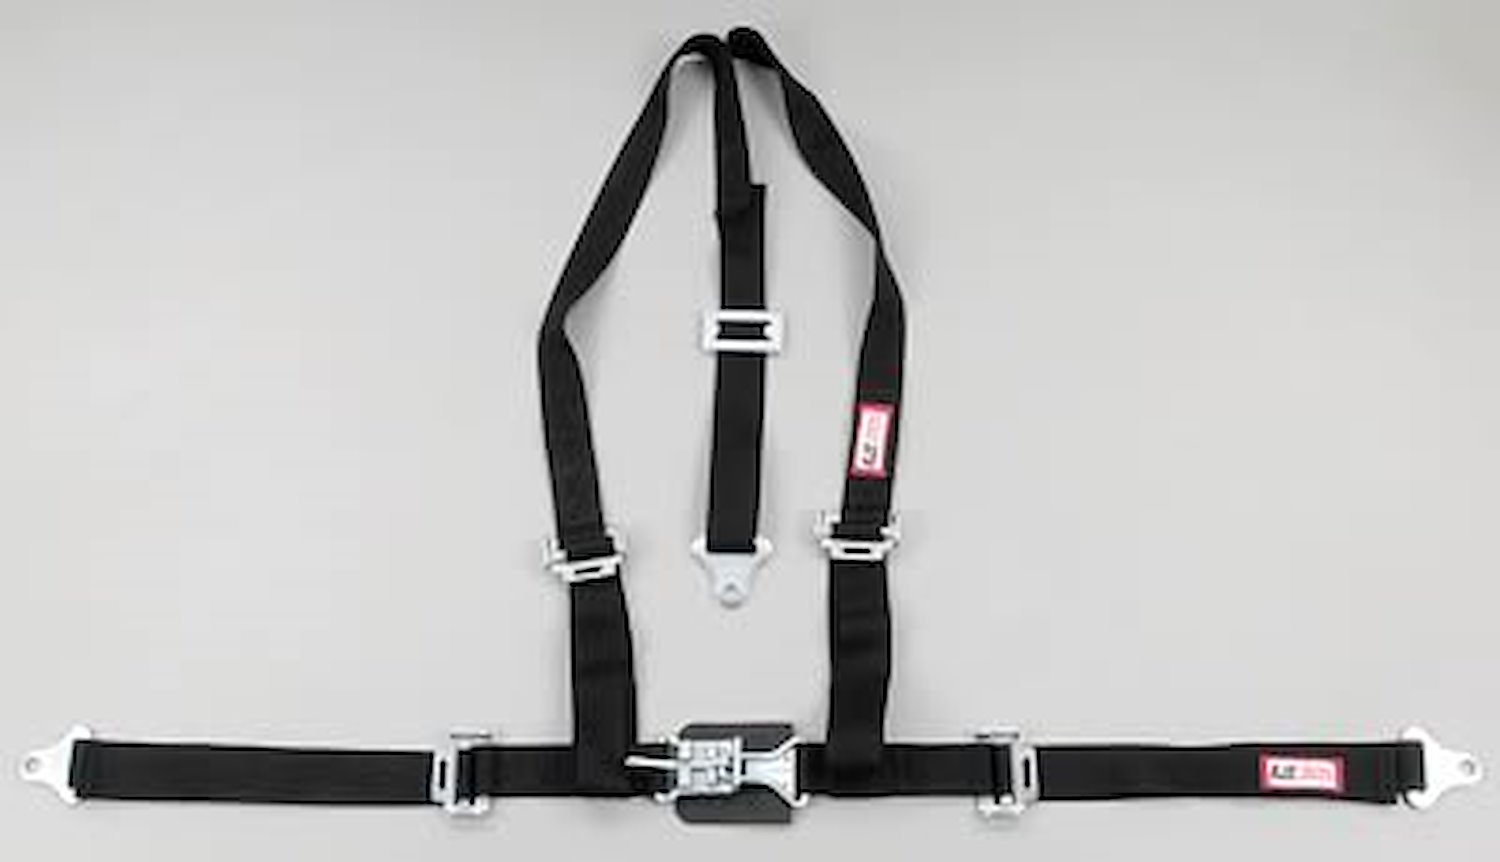 NON-SFI L&L HARNESS 2 PULL DOWN Lap Belt w/Adjuster 2 S.H. Y FLOOR MOUNT w/STERNUM STRAP ALL WRAP ENDS HOT PINK